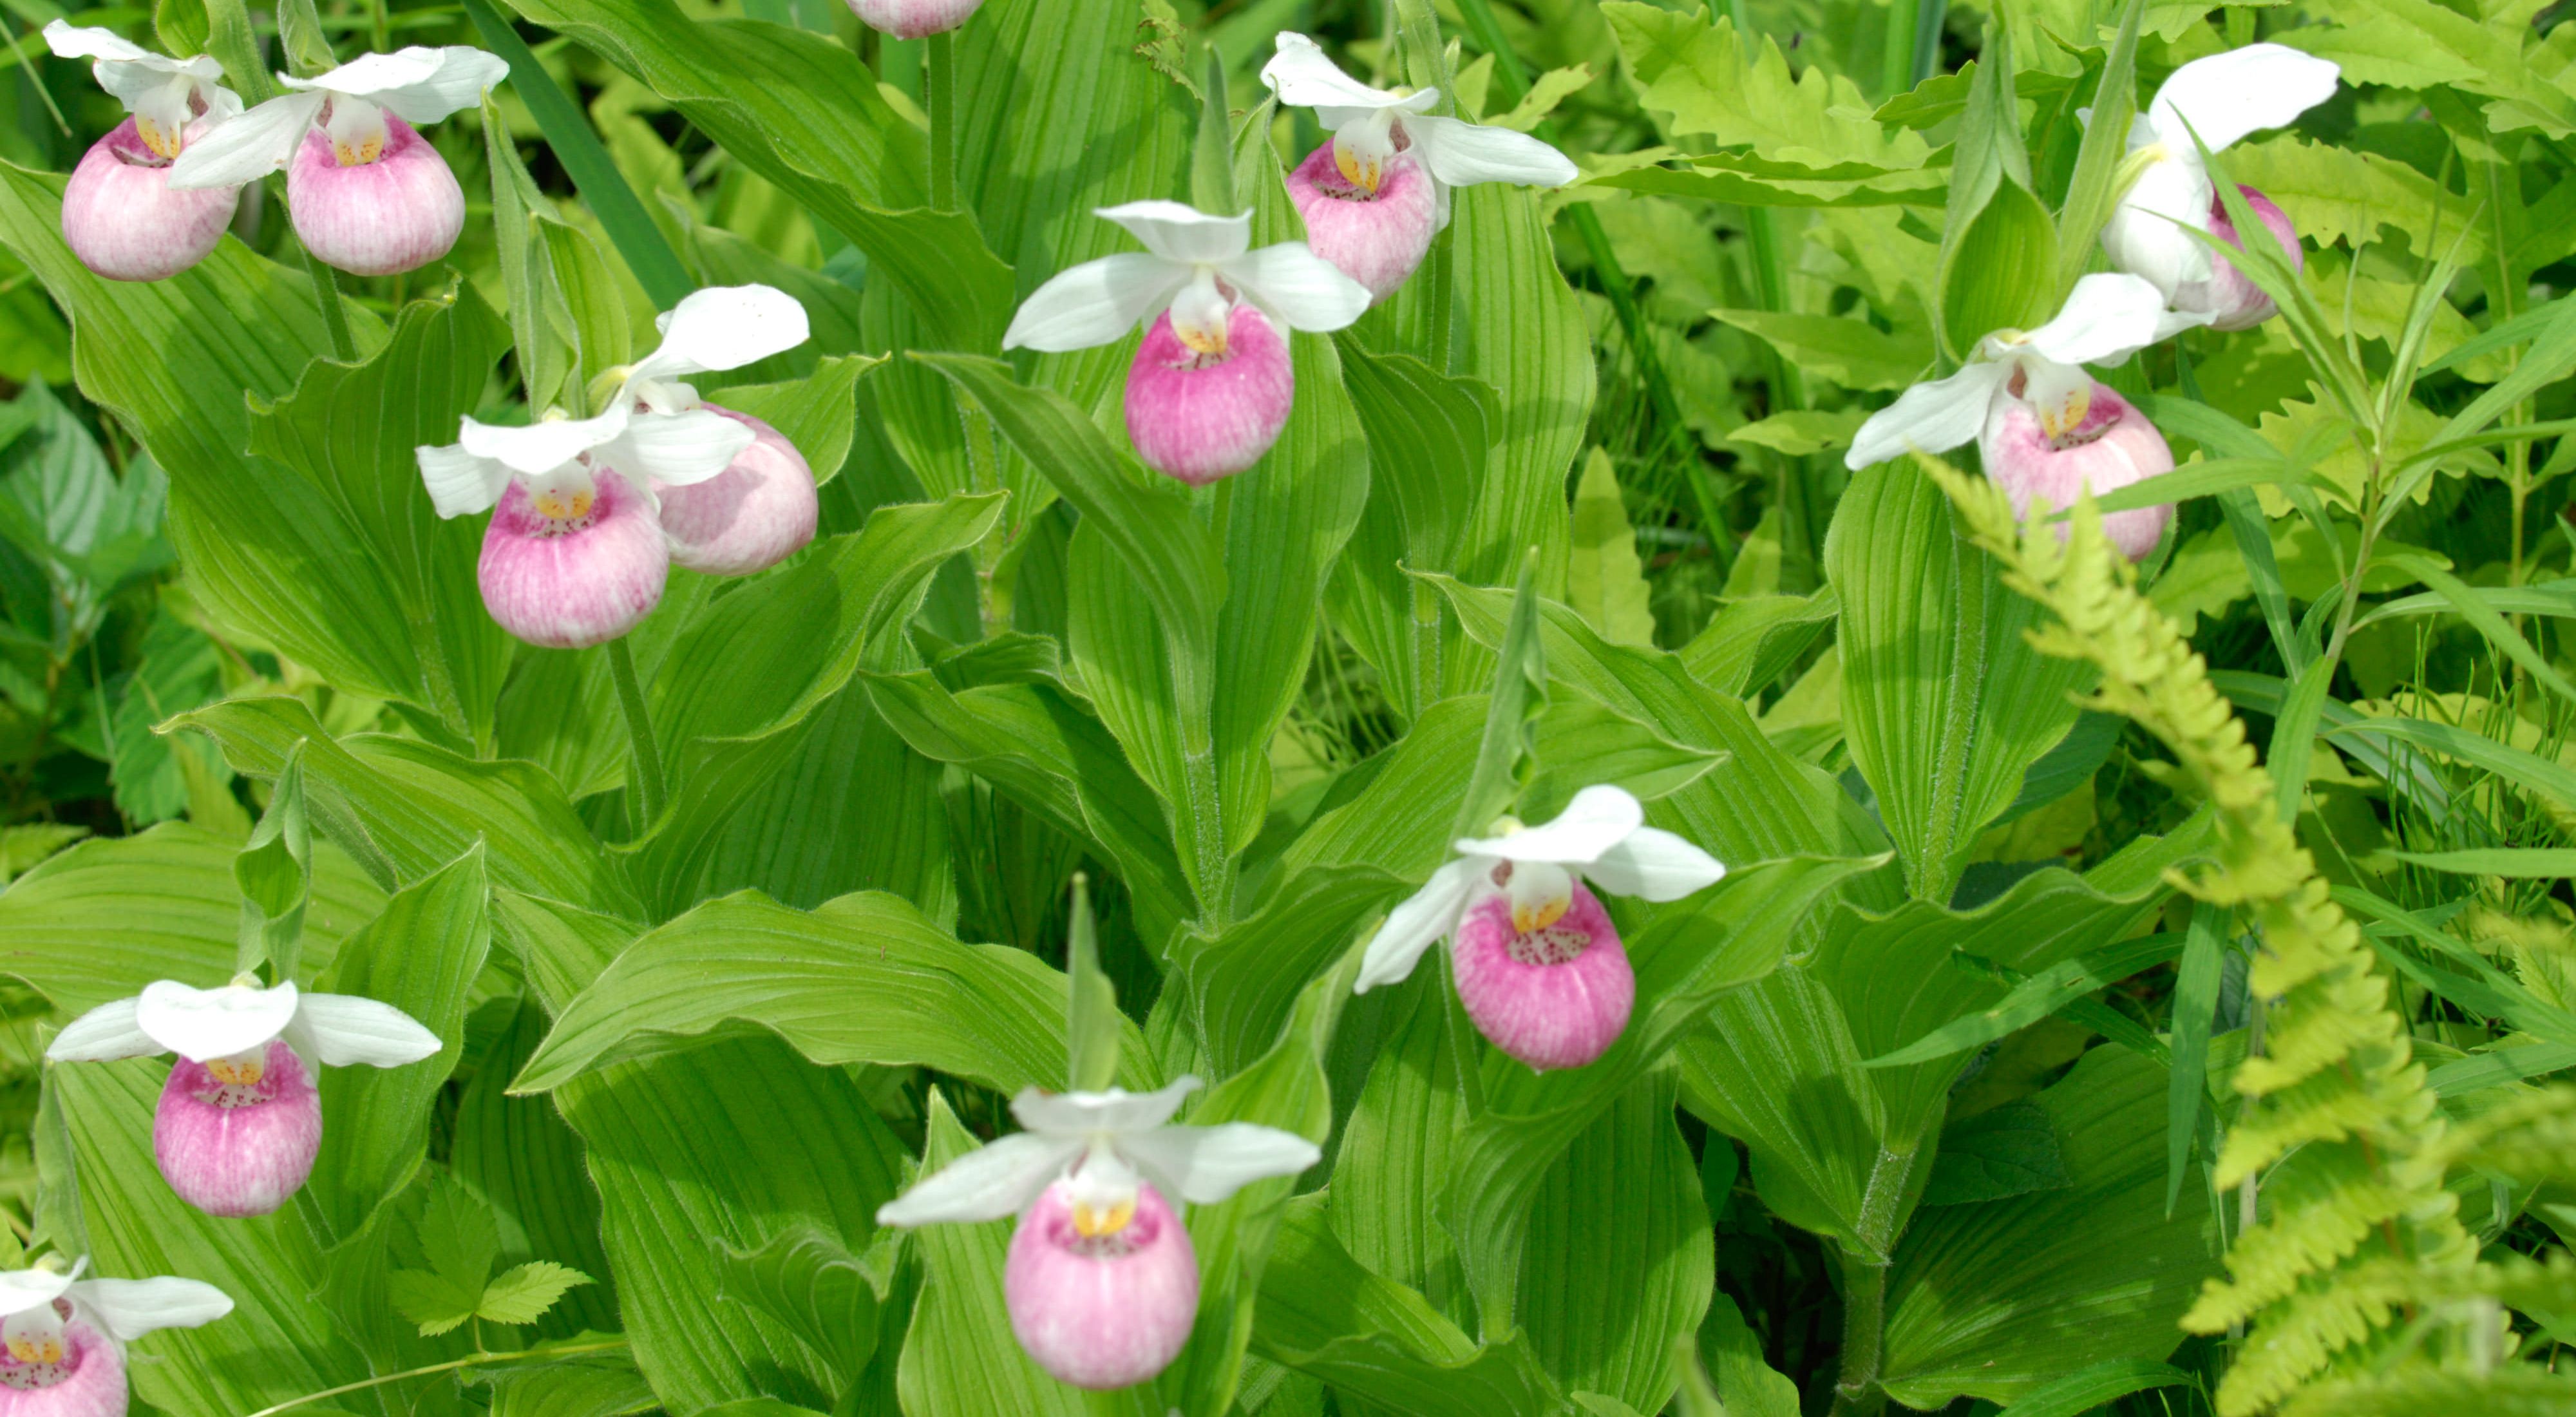 Wildflowers with a rounded, pink portion overhung by three white petals, on a bed of bright green foliage.